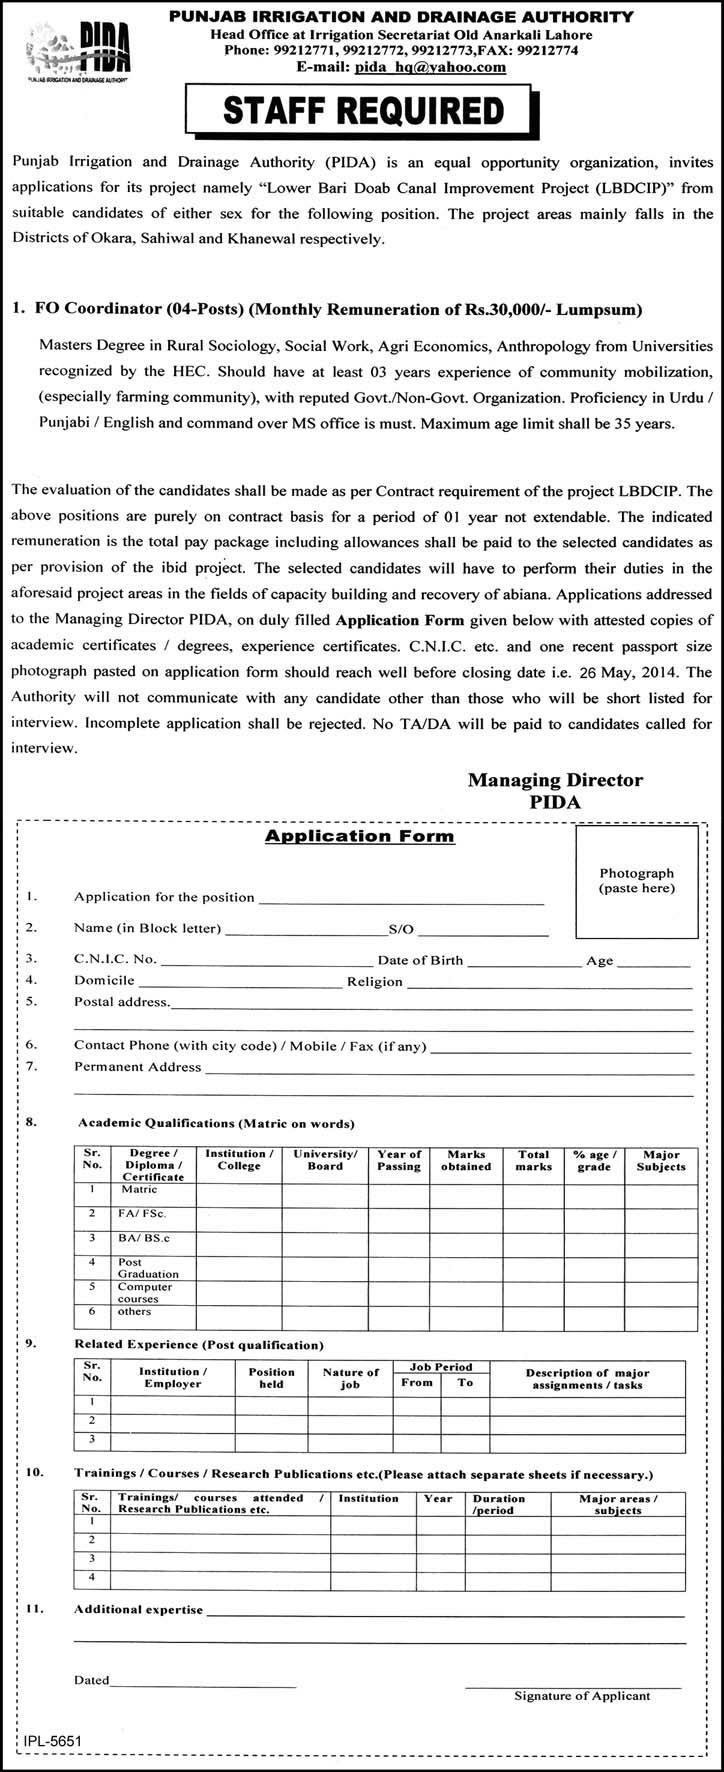 Punjab Irrigation and Drainage Authority Jobs 2014 Application Form